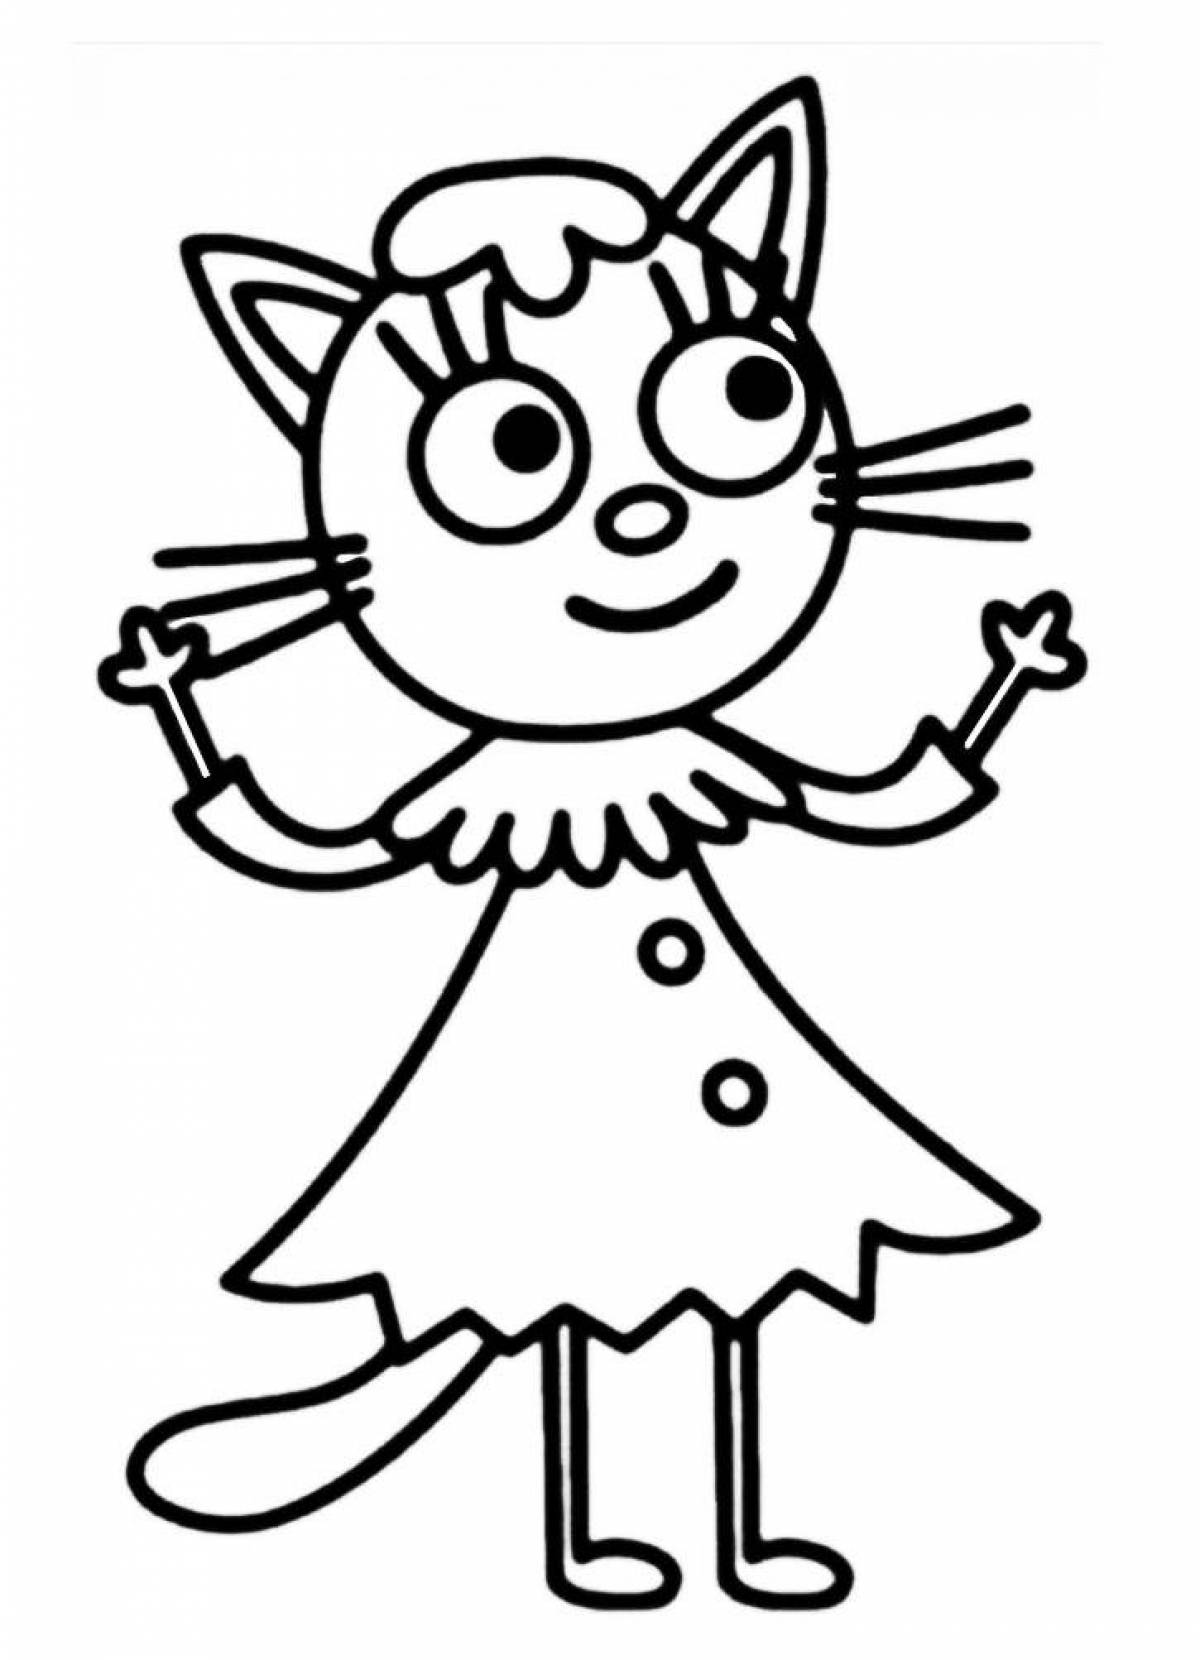 Splendid 3 cats coloring page for pre-ks